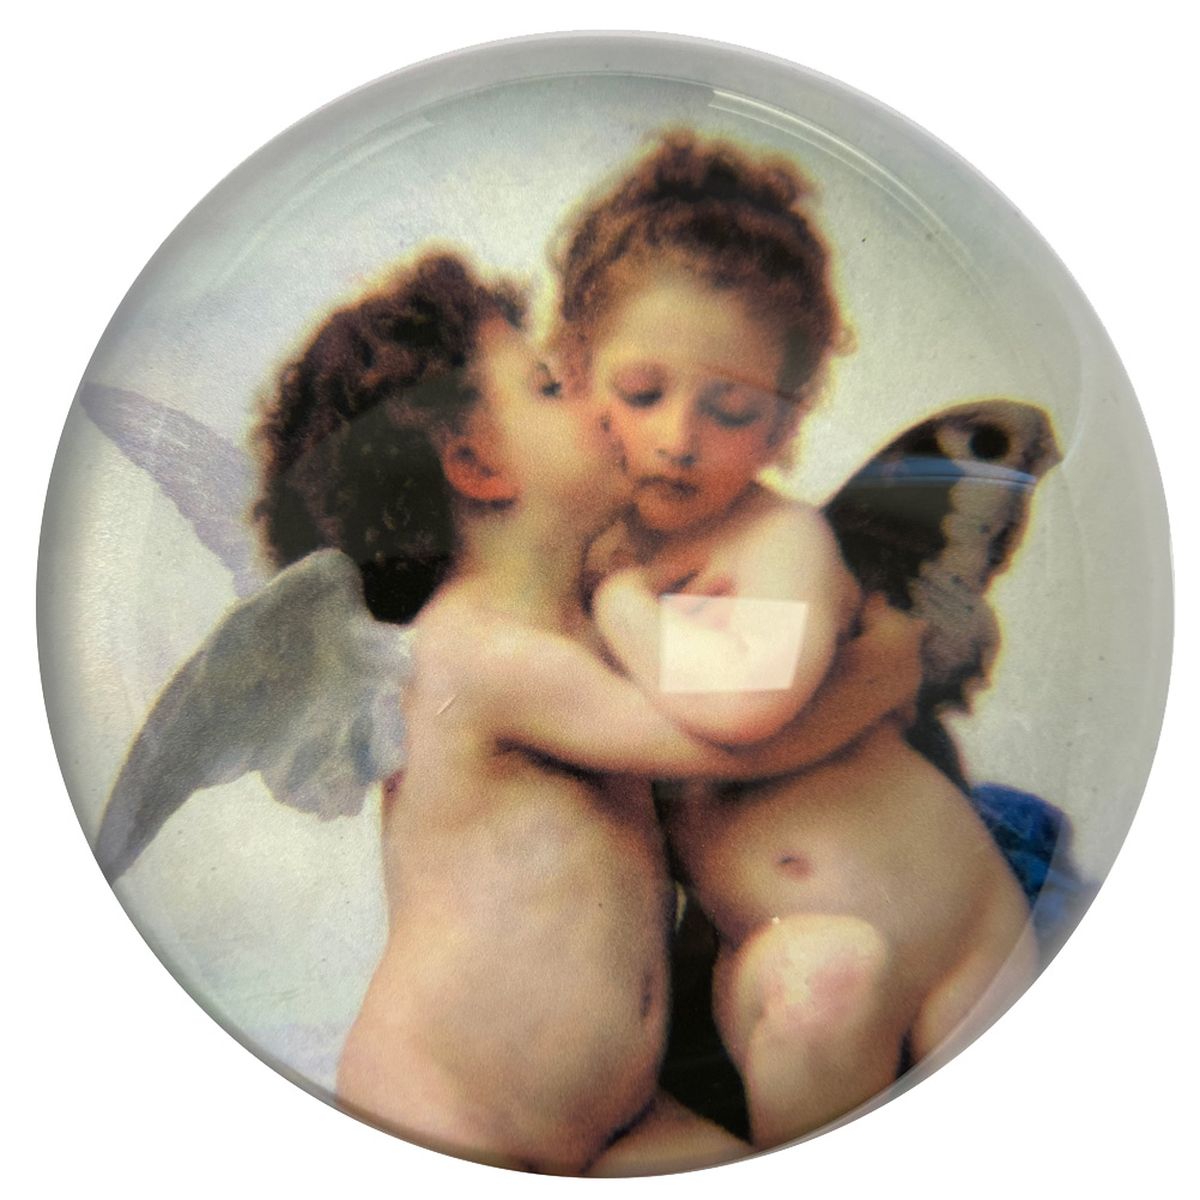 Paperweight - L'Amour et Psych bY BOUGUEREAU